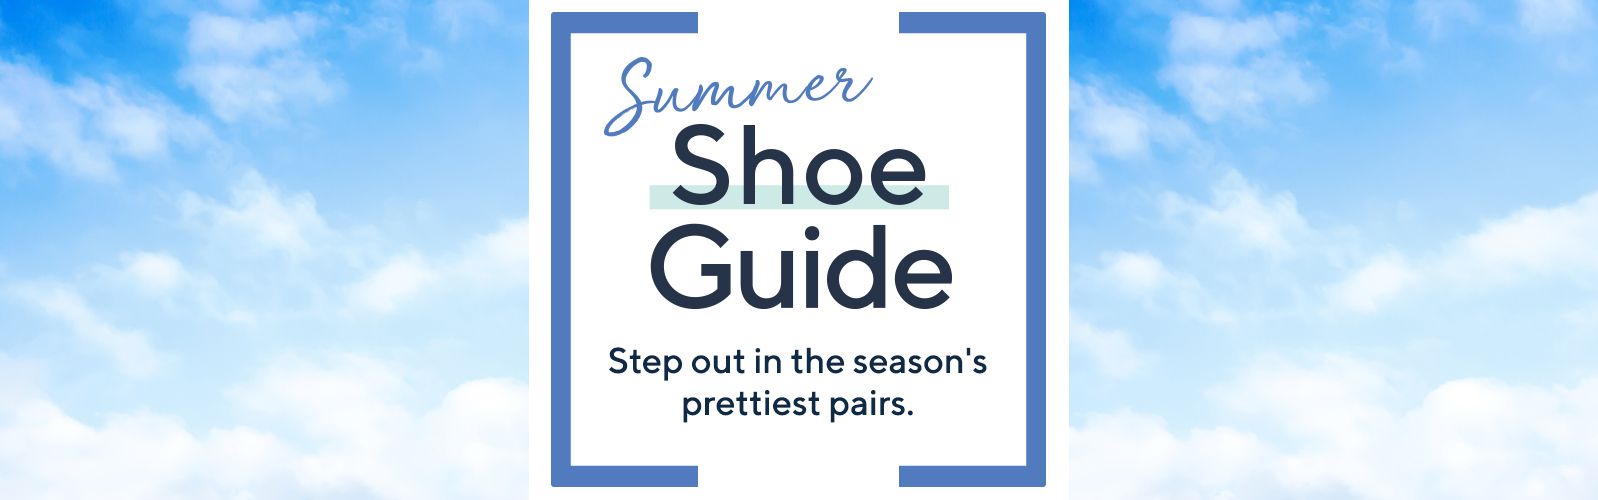 Summer Shoe Guide Step out in the season's prettiest pairs.